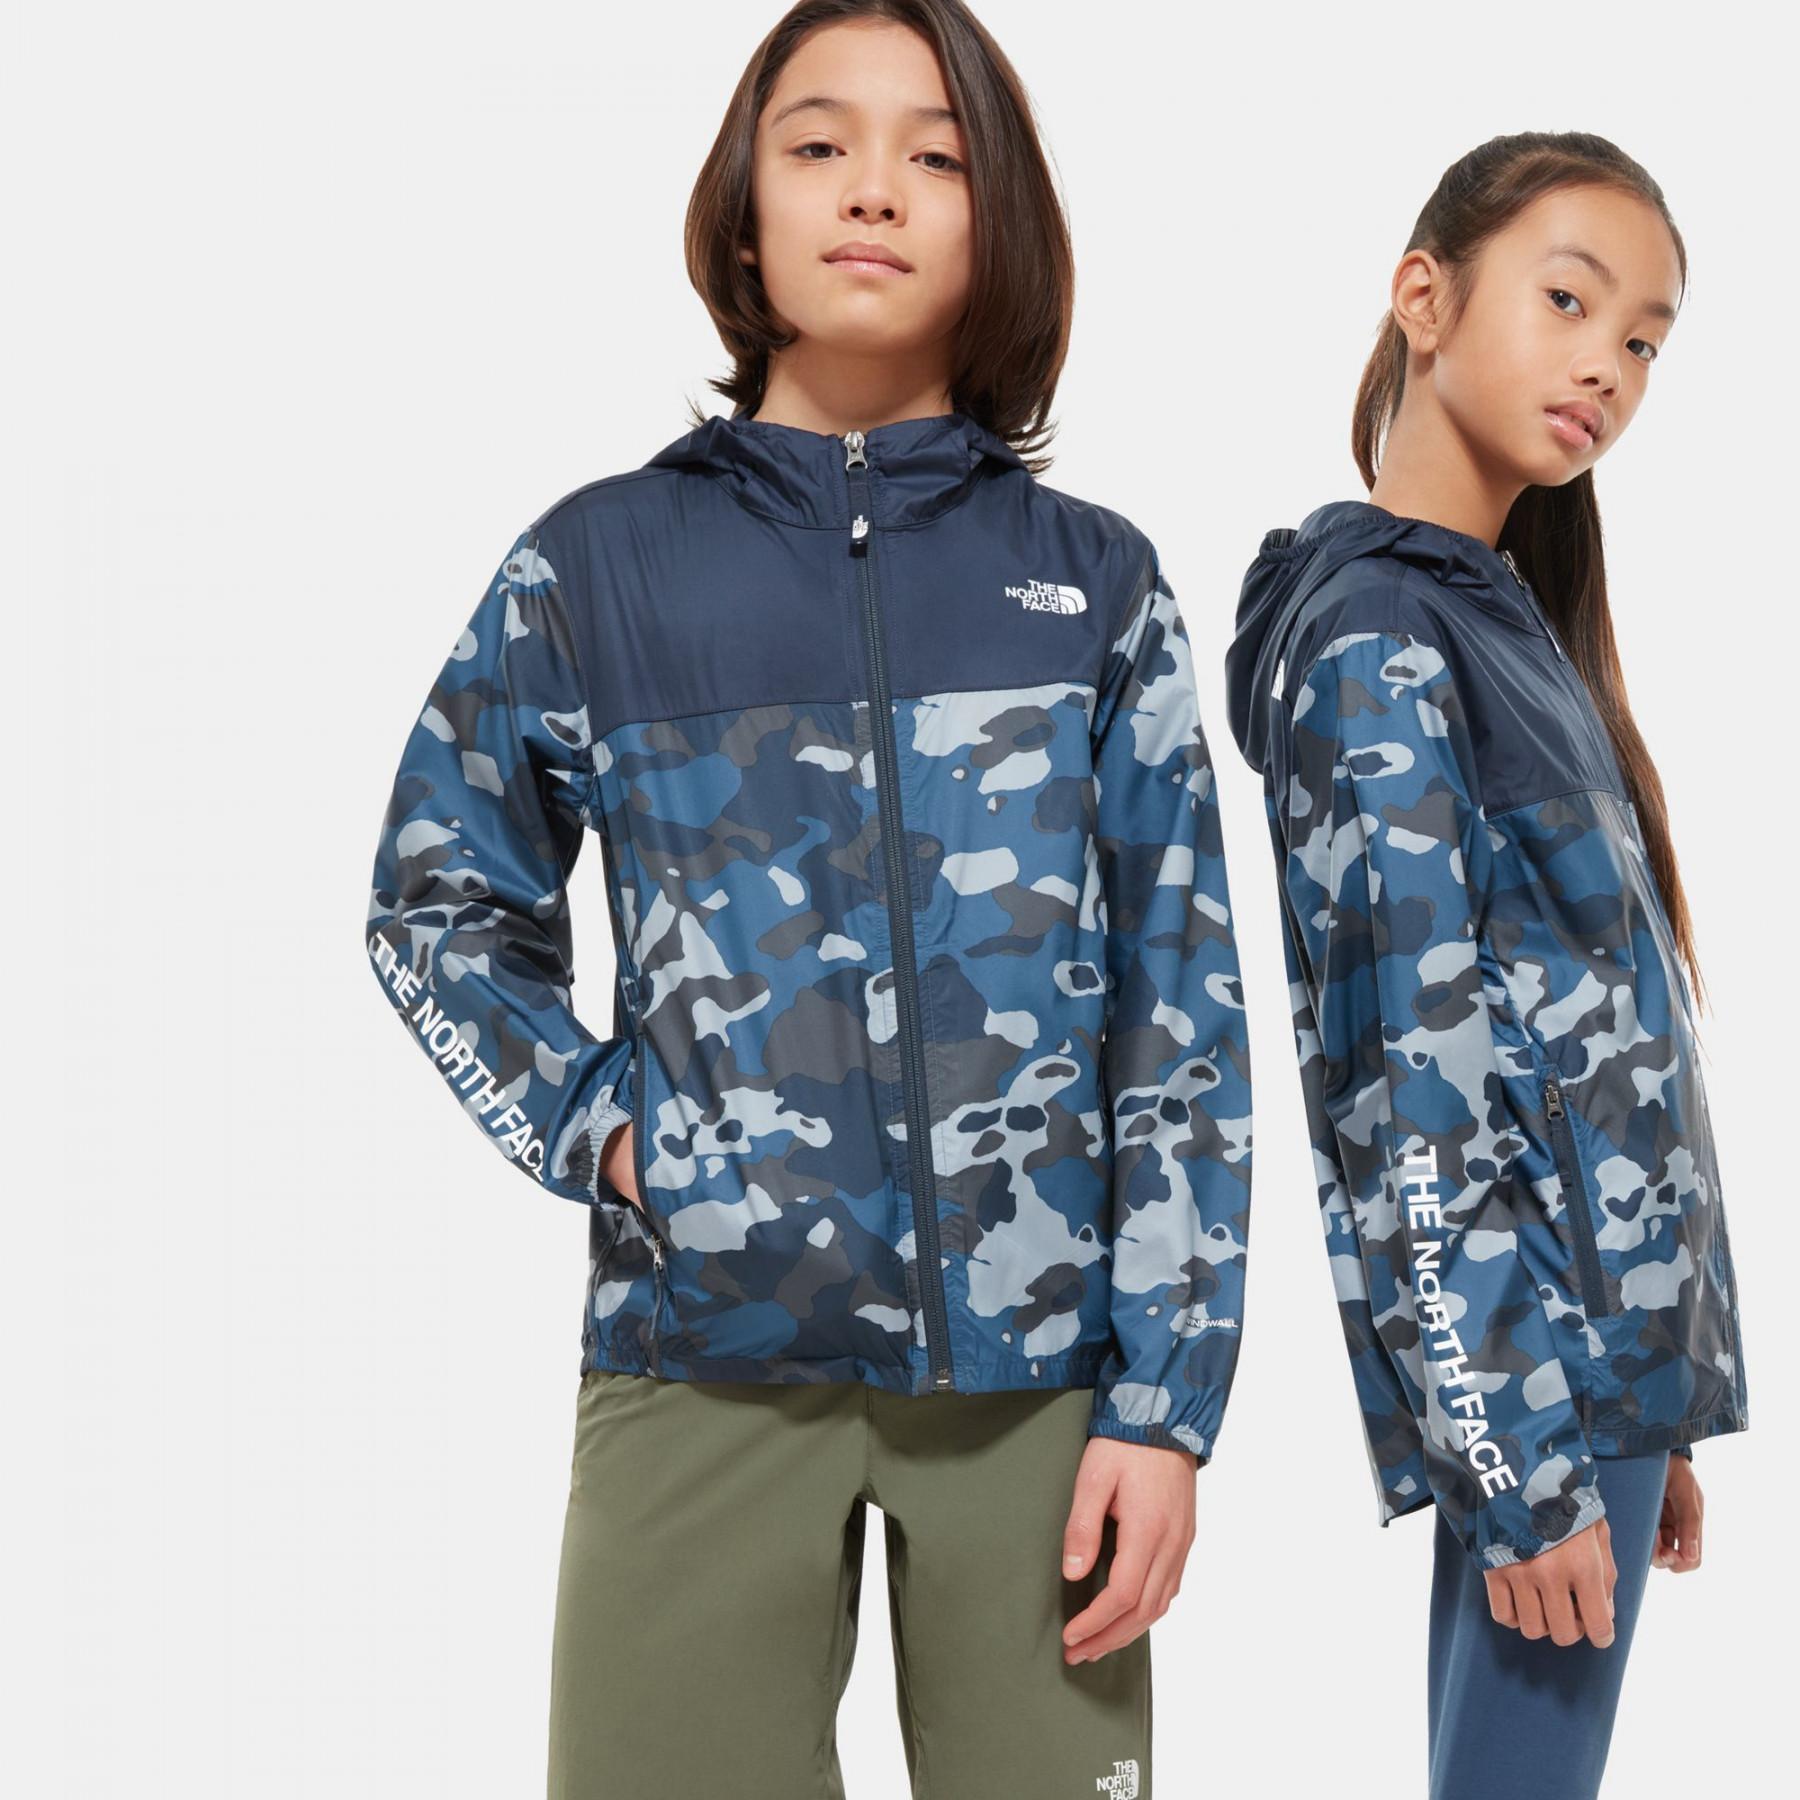 Children's windcheater The North Face Reactor